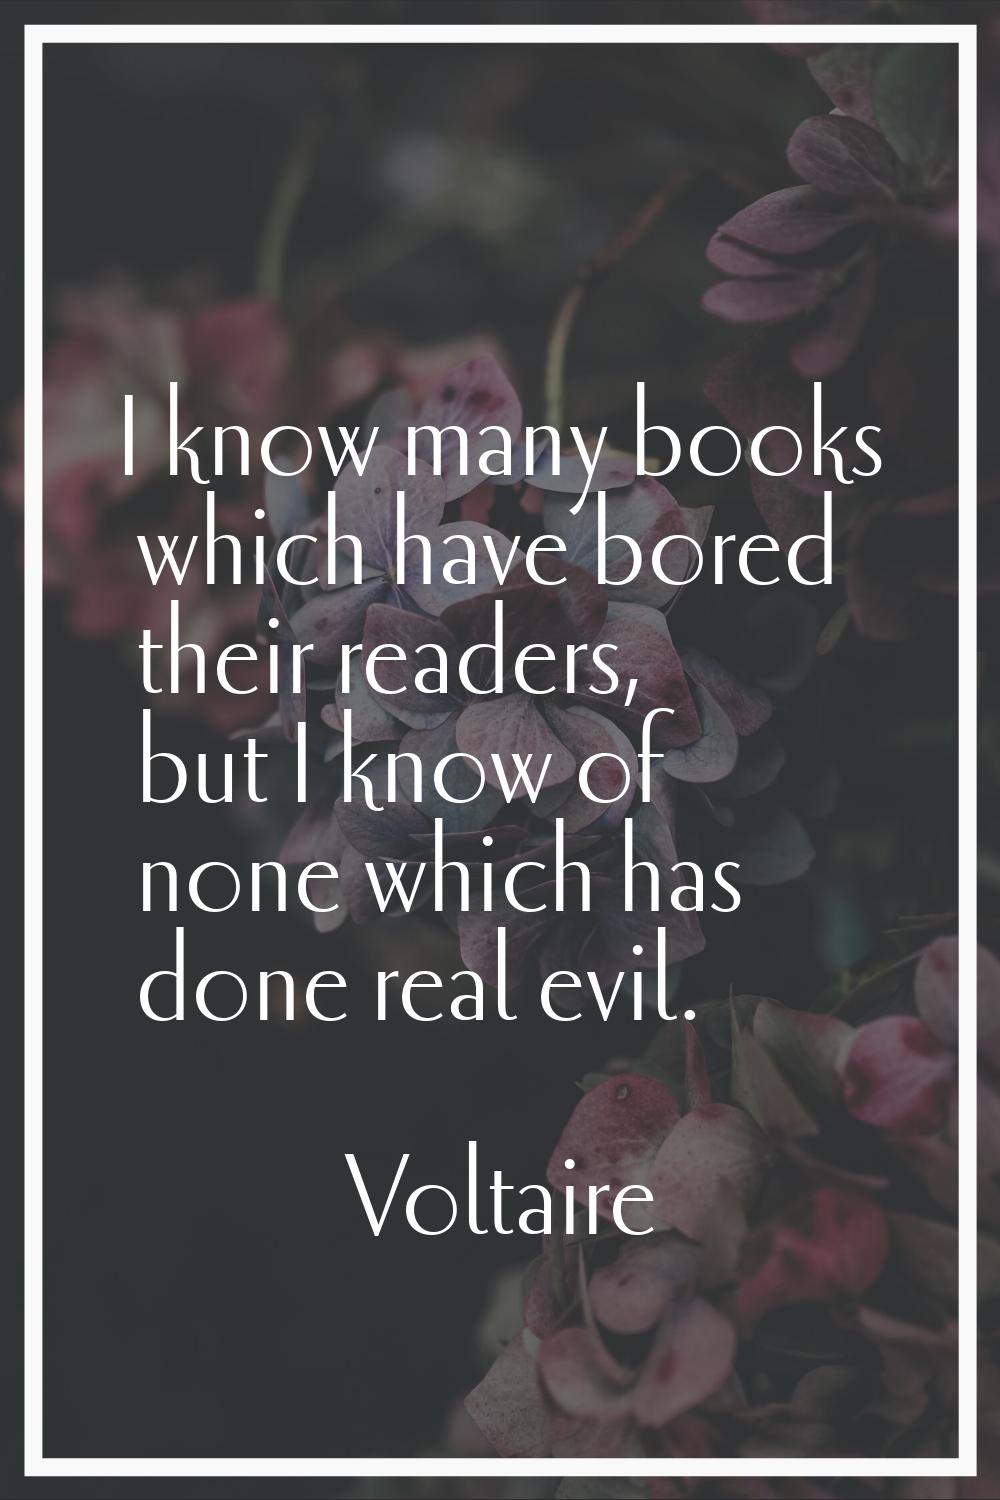 I know many books which have bored their readers, but I know of none which has done real evil.